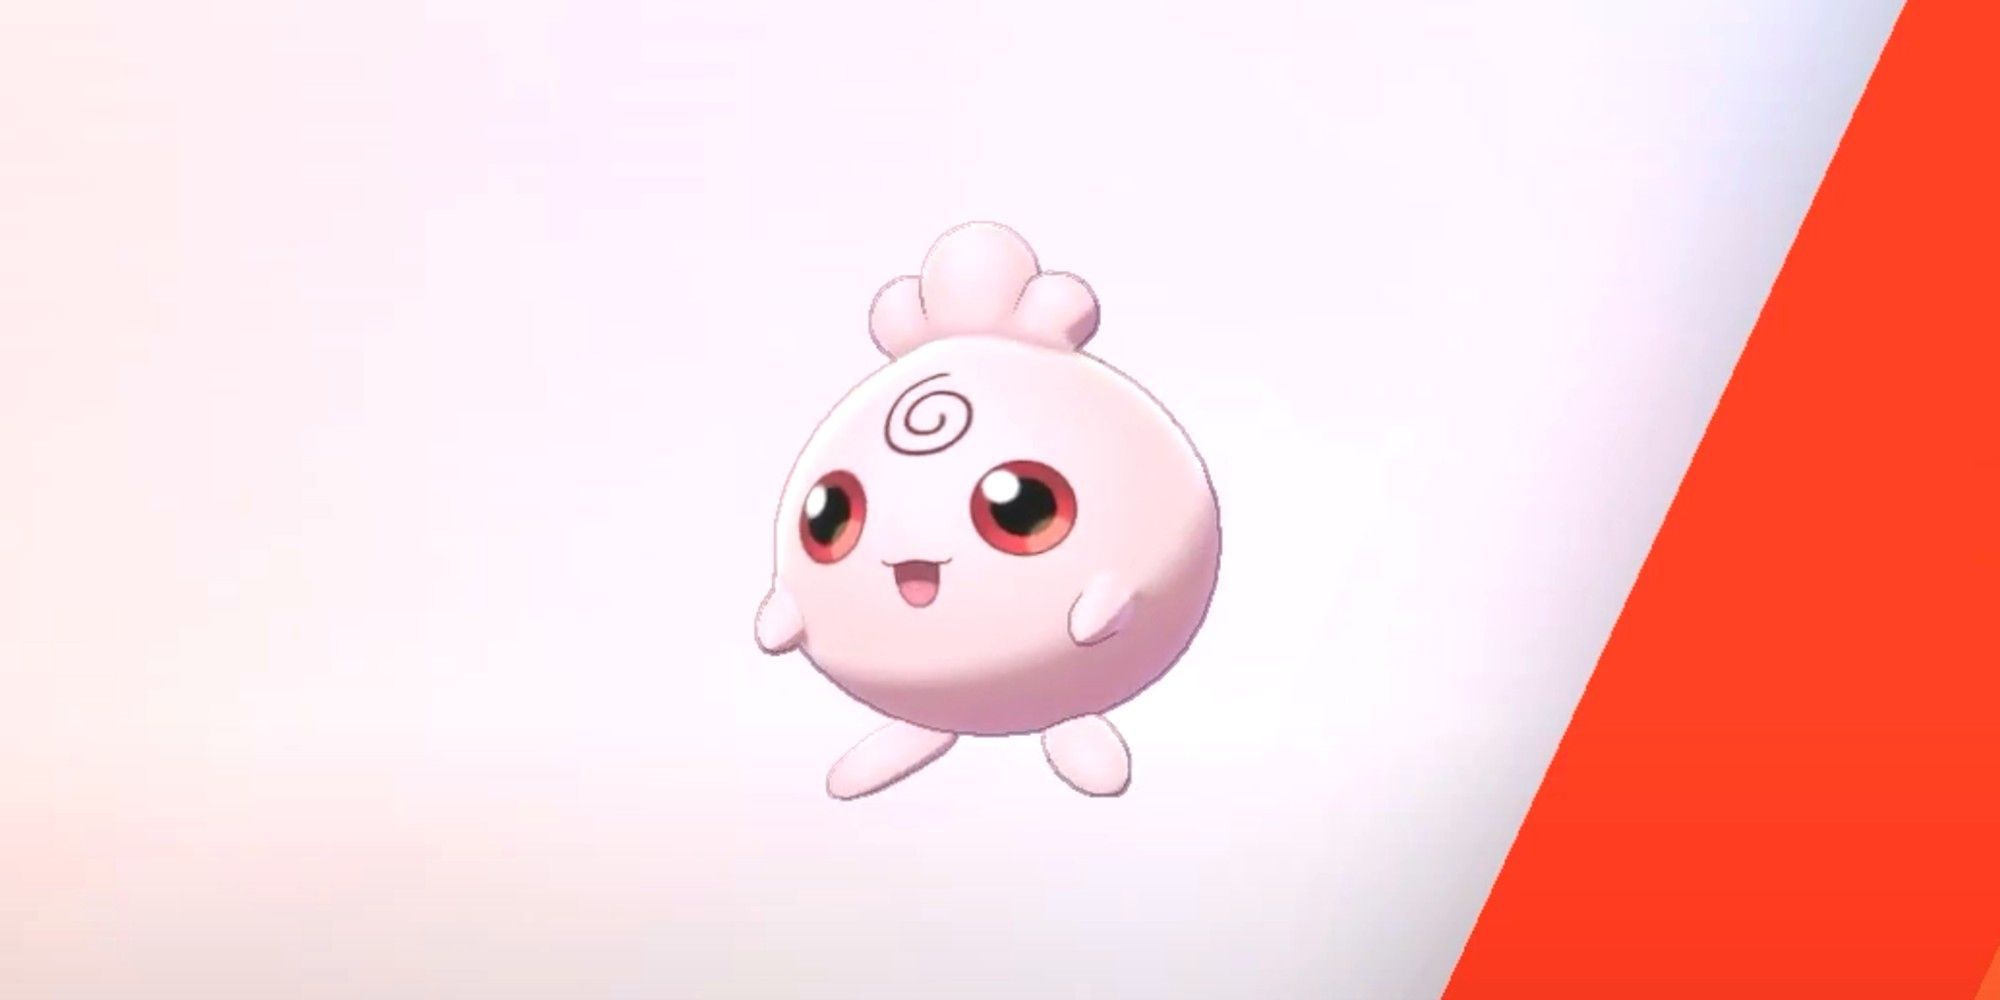 Igglybuff after being freshly caught in Pokemon Sword & Shield